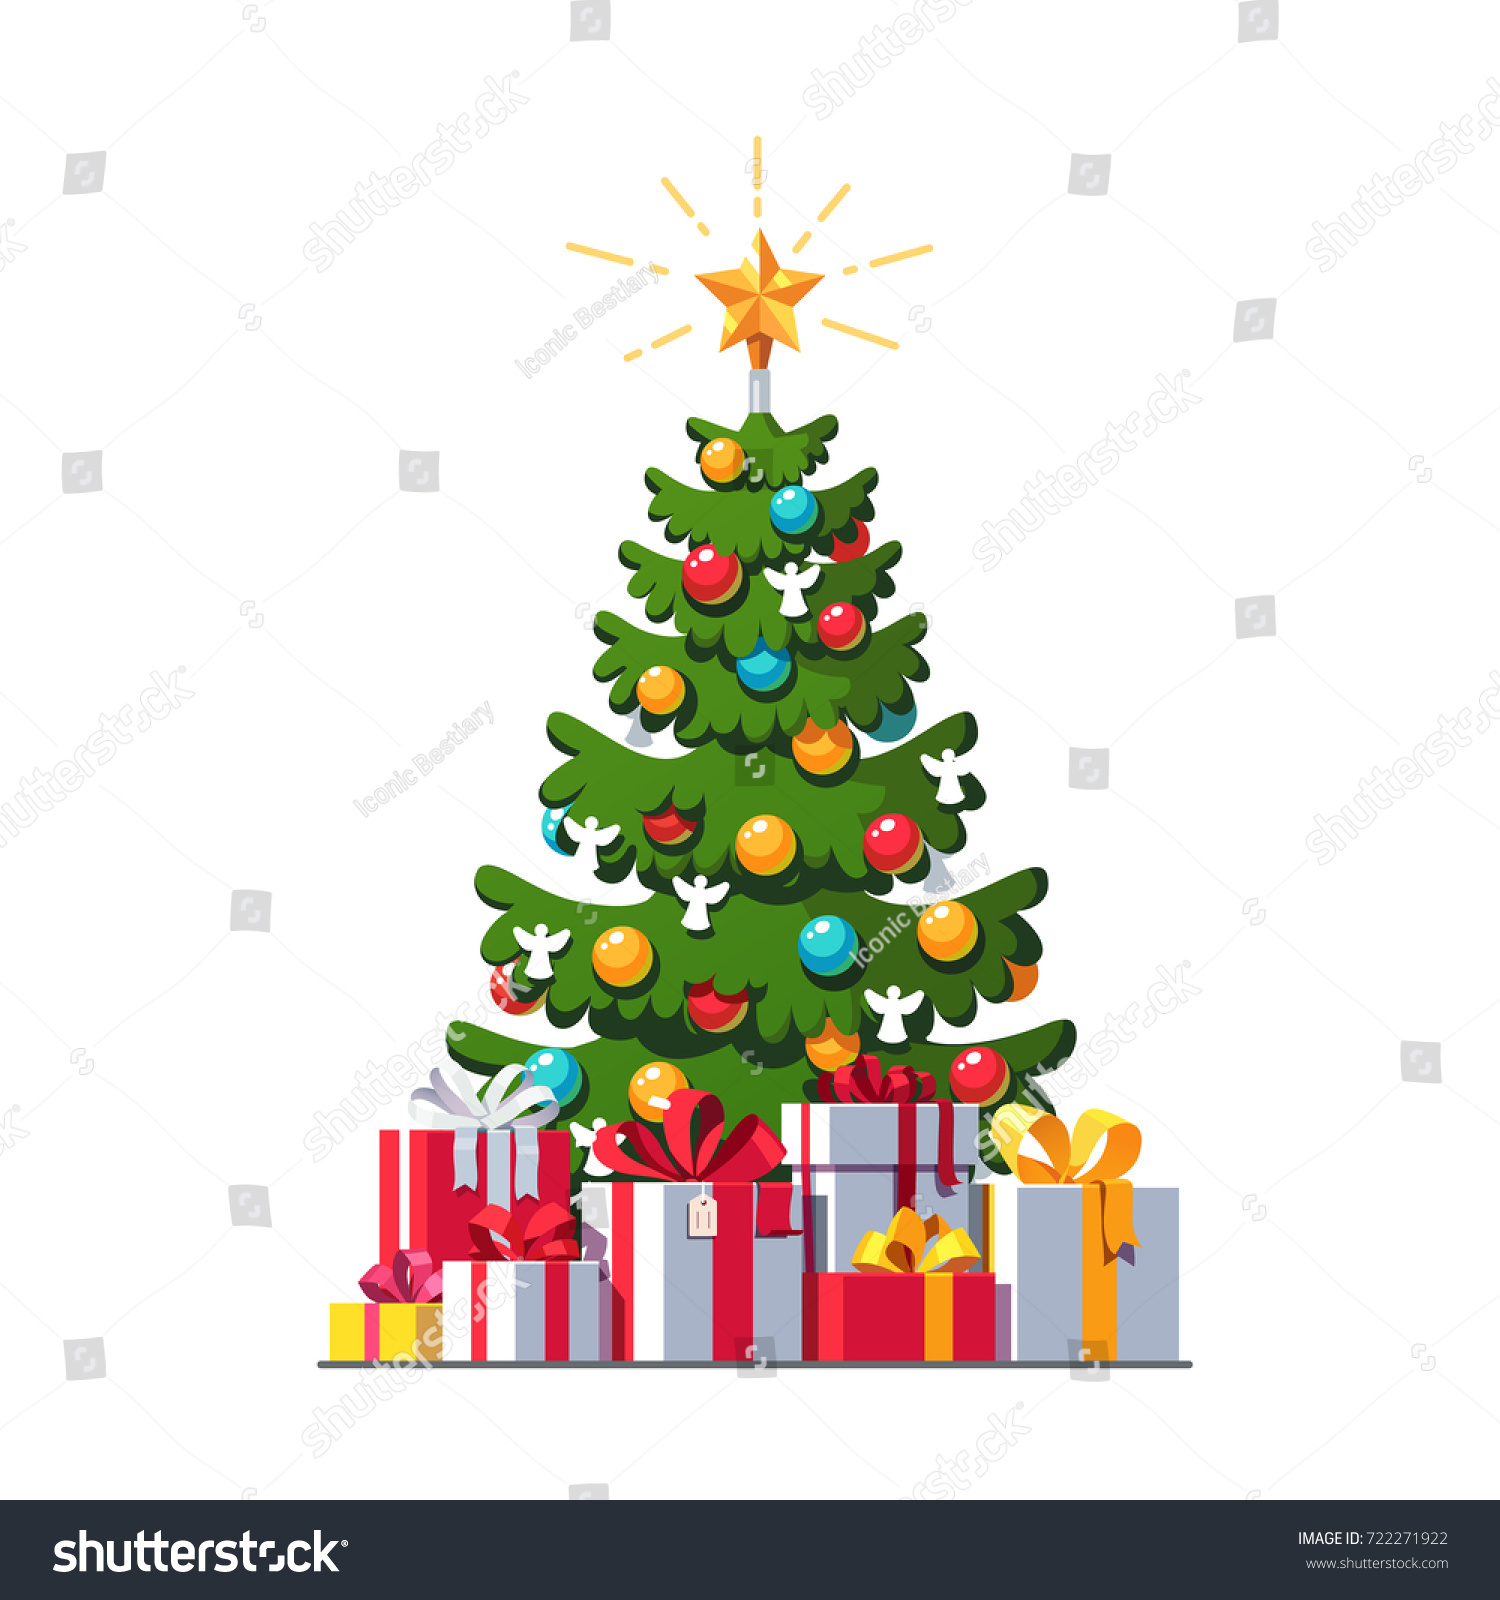 Big Colorful Wrapped Gift Boxes Pile Stock Vector 722271922 ...